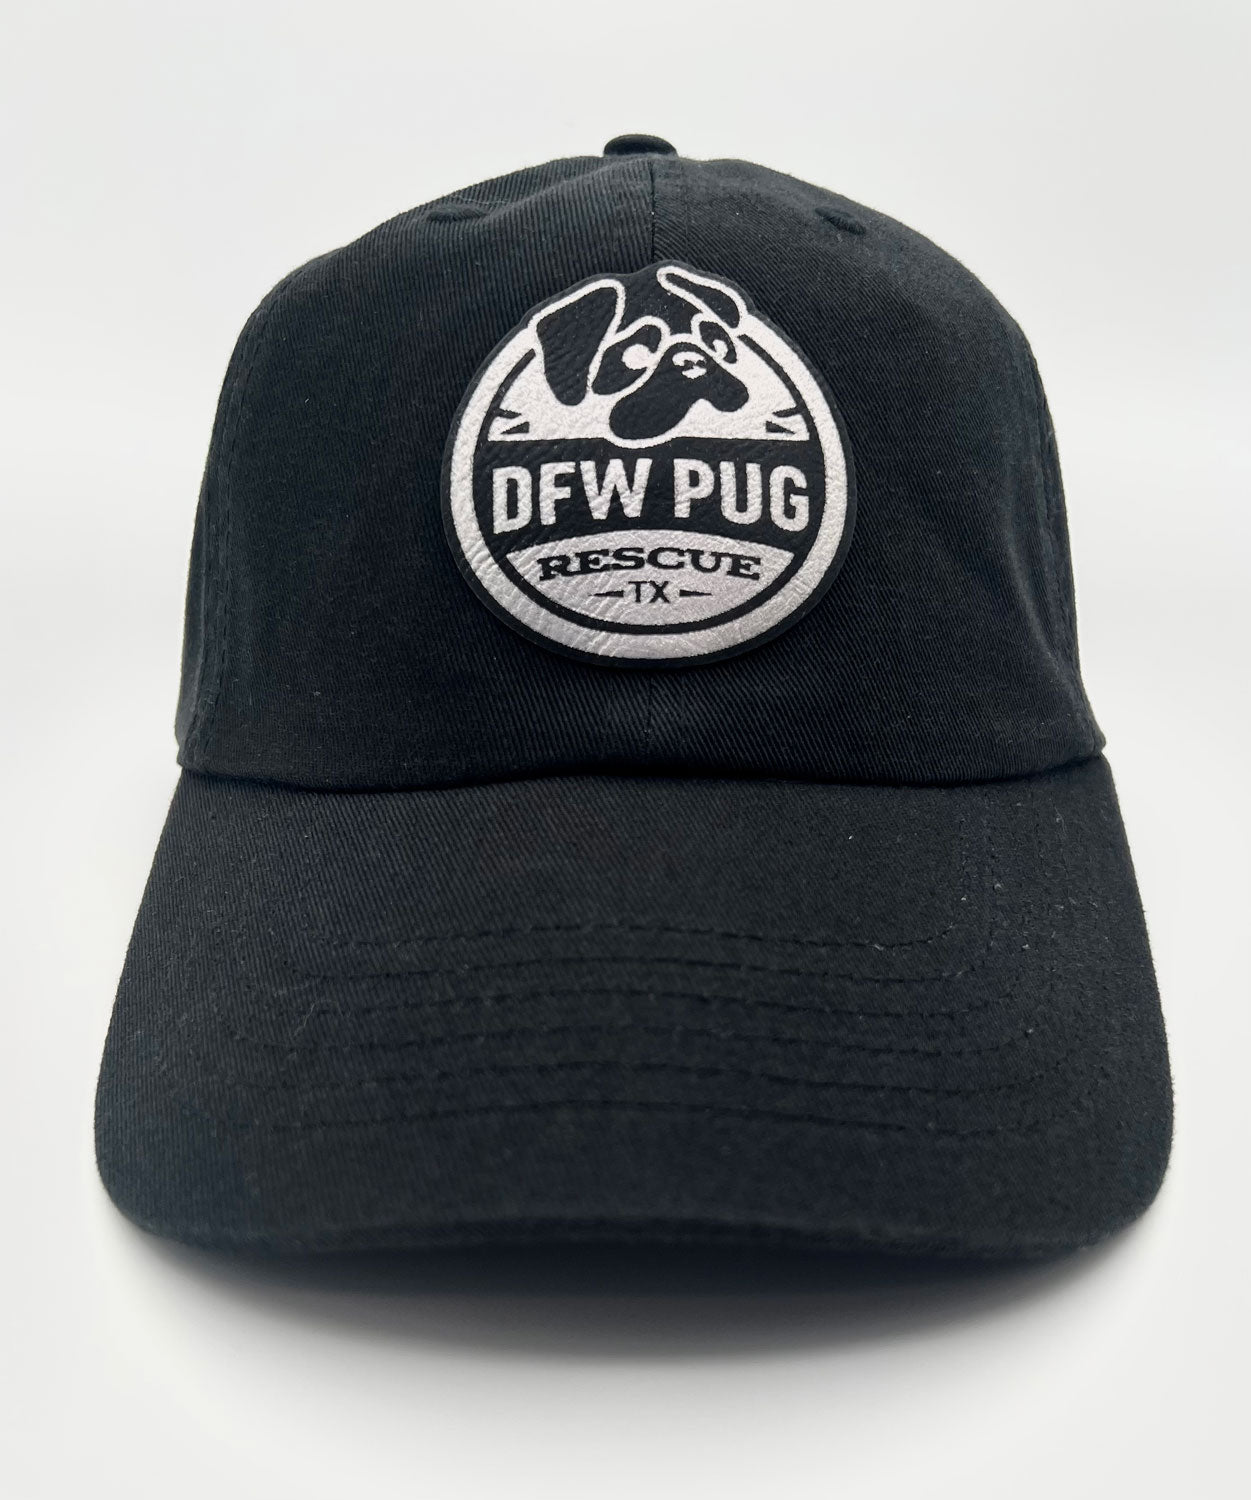 Unstructured black dad patch hat featuring the DFW Pug Rescue logo on a black and silver patch.